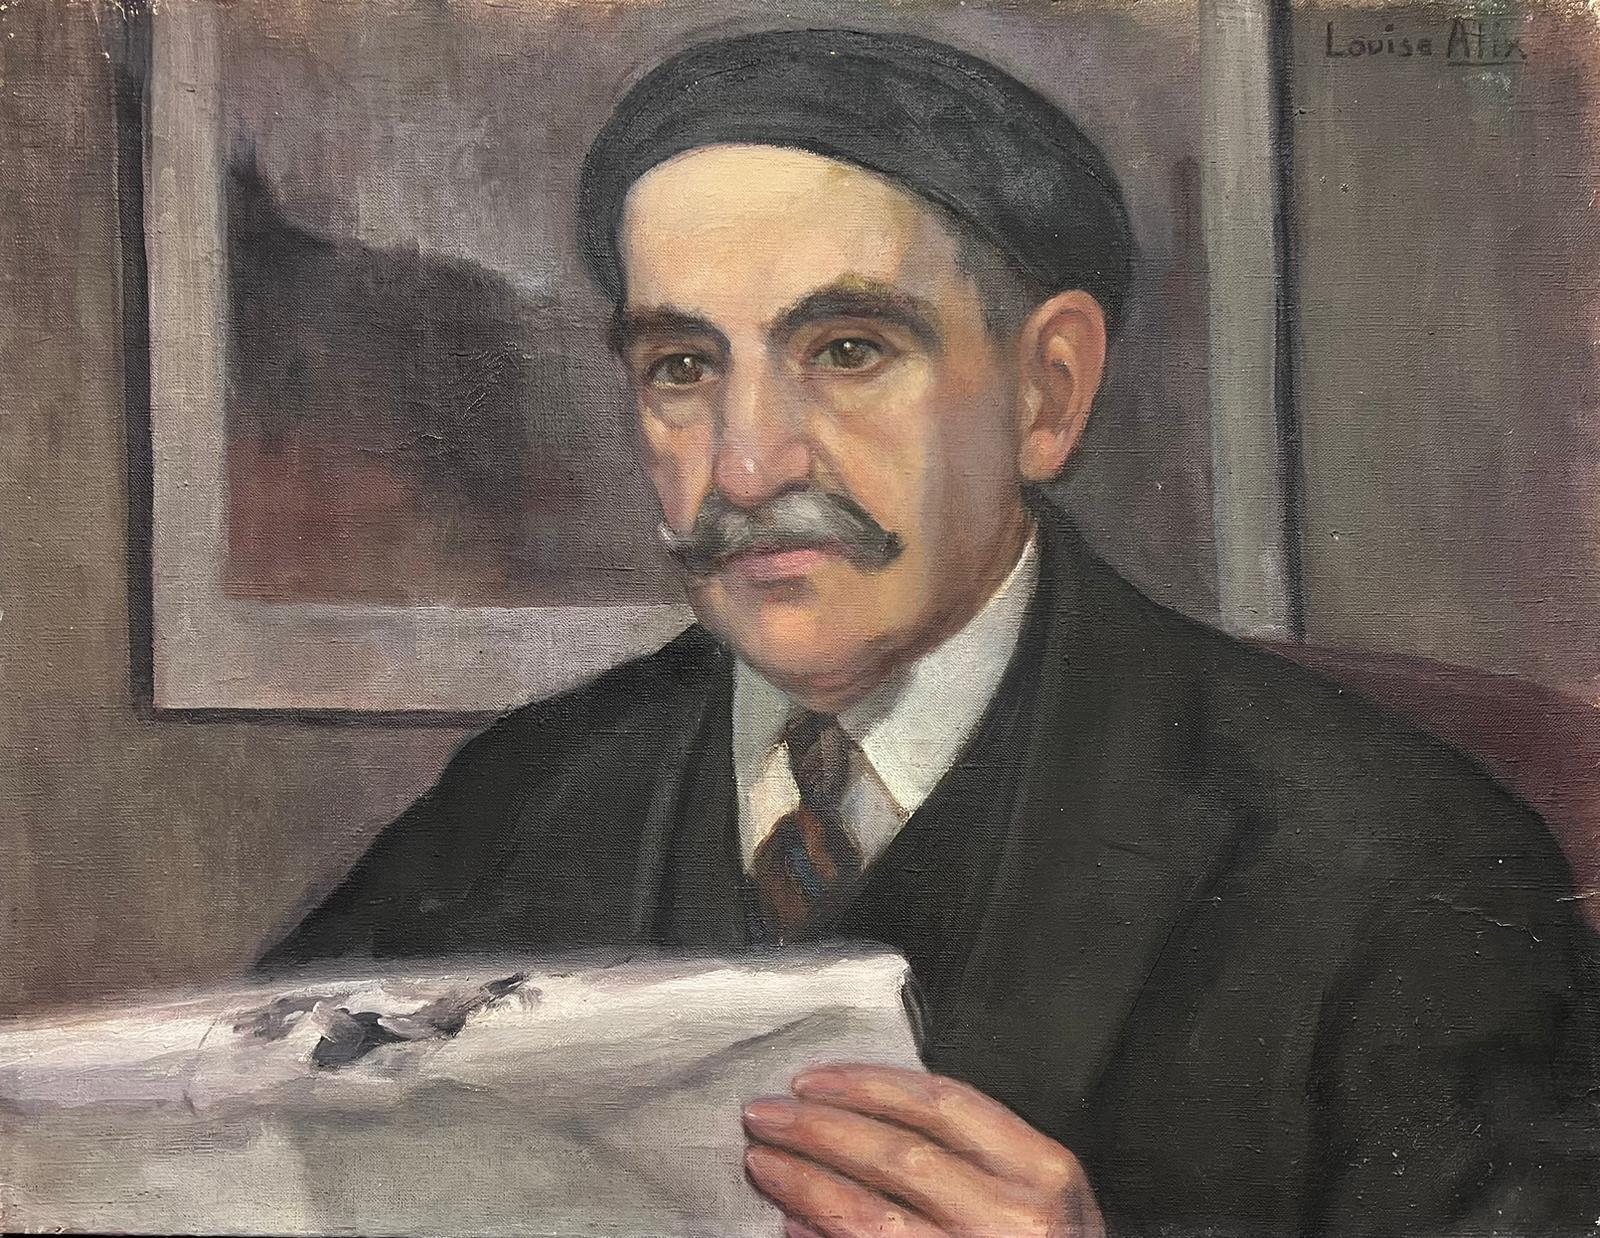 Louise Alix Portrait Painting - 1930's French Portrait Man with Moustache Reading Paper Signed Oil Painting